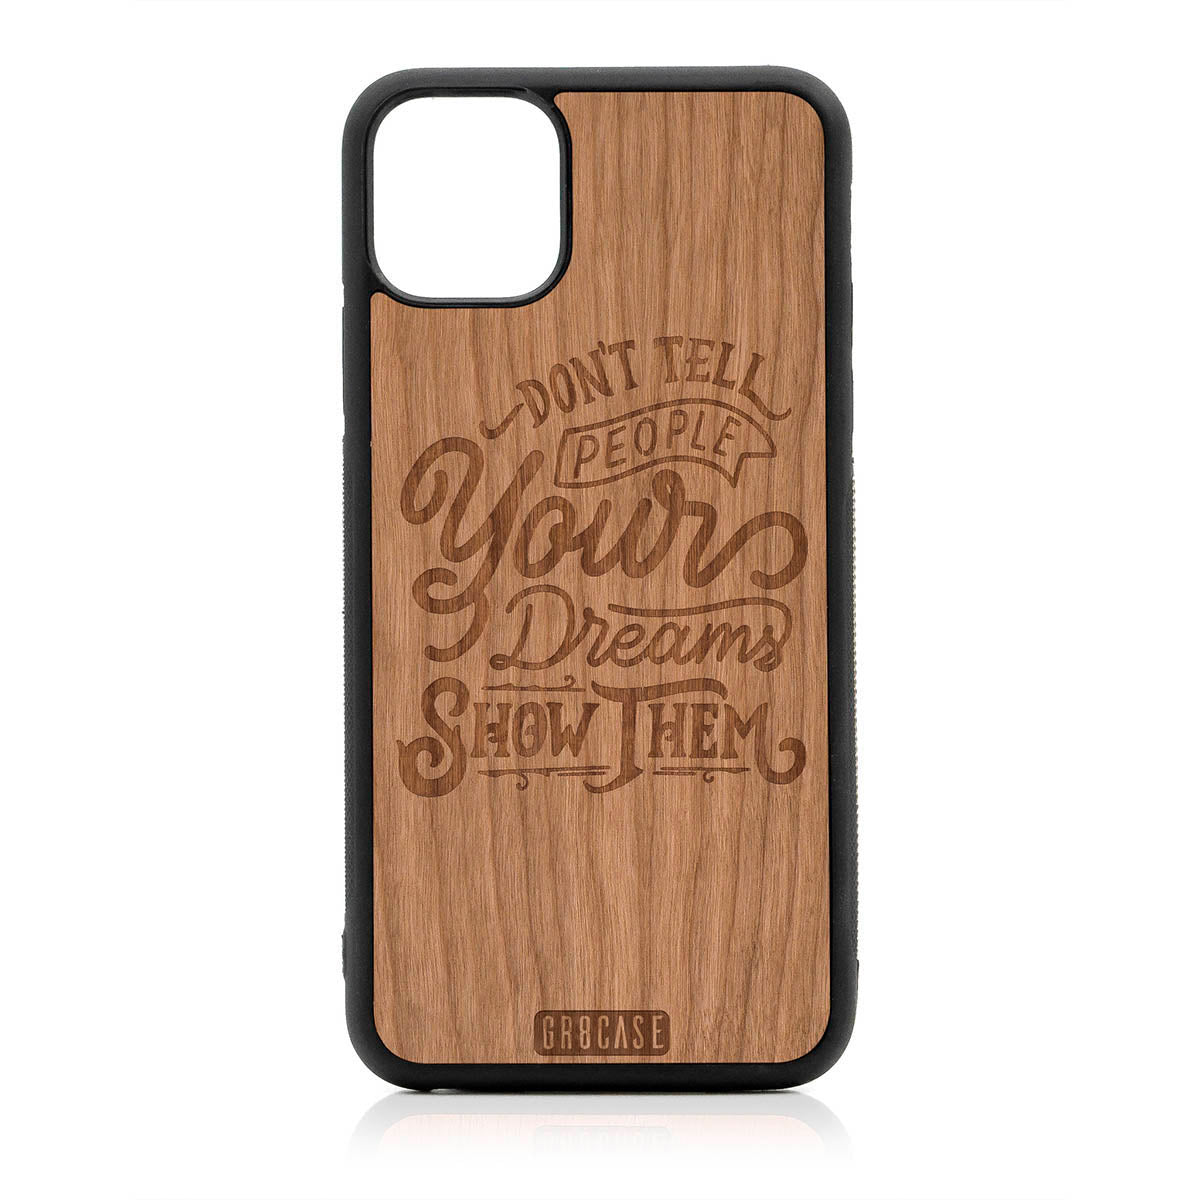 Don't Tell People Your Dreams Show Them Design Wood Case For iPhone 11 Pro Max by GR8CASE